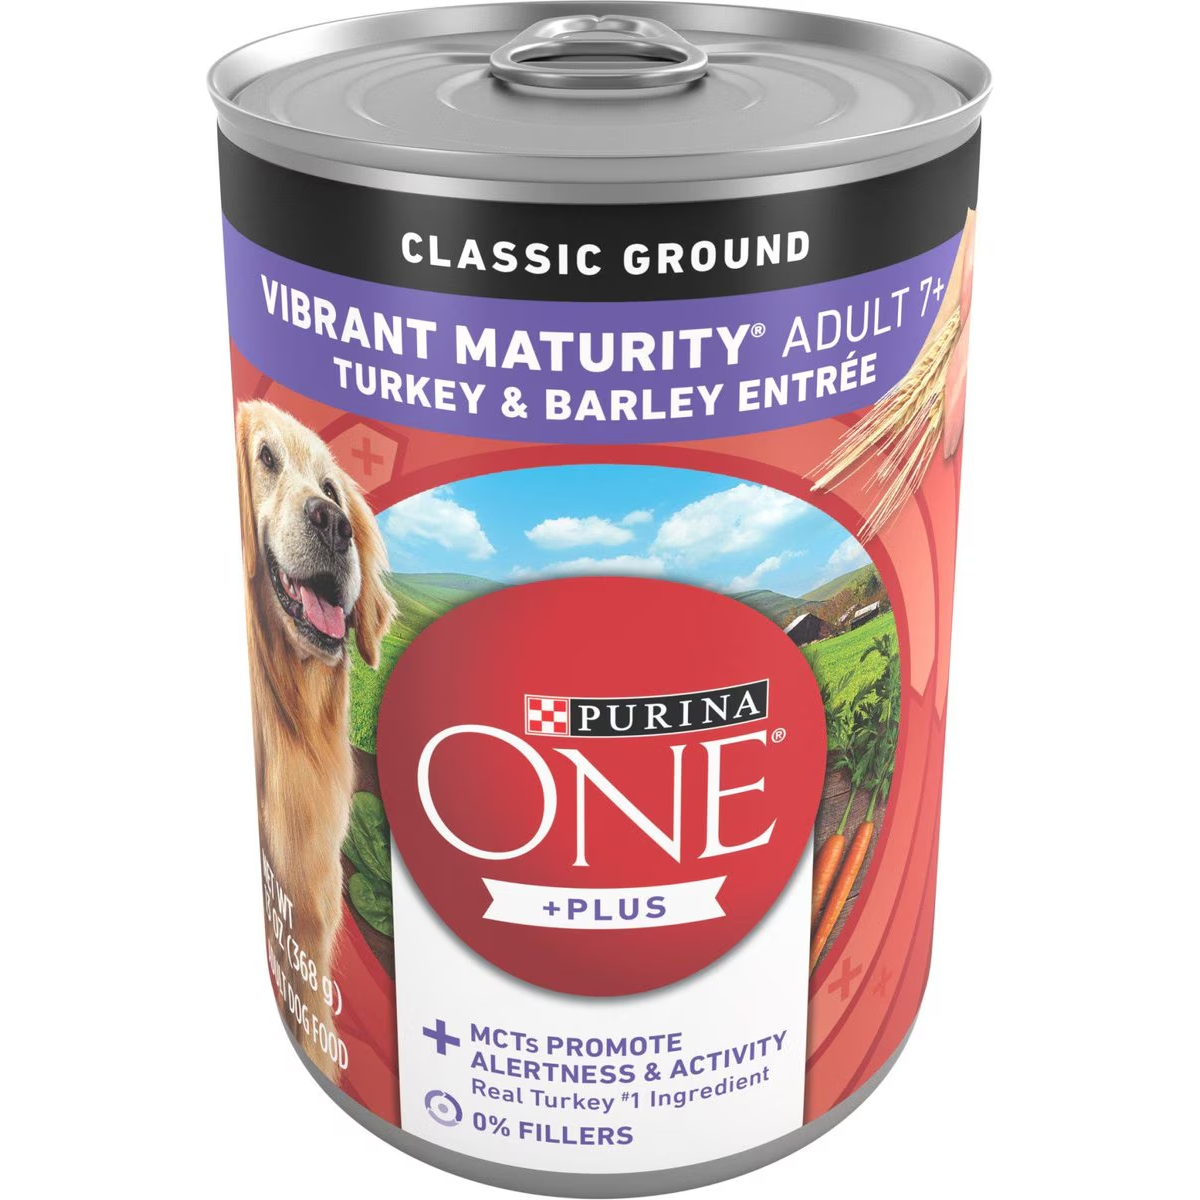 New Project Purina ONE +Plus Adult Classic Ground Vibrant Maturity Senior Adult 7+ Turkey & Barley Entree Canned Dog Food 